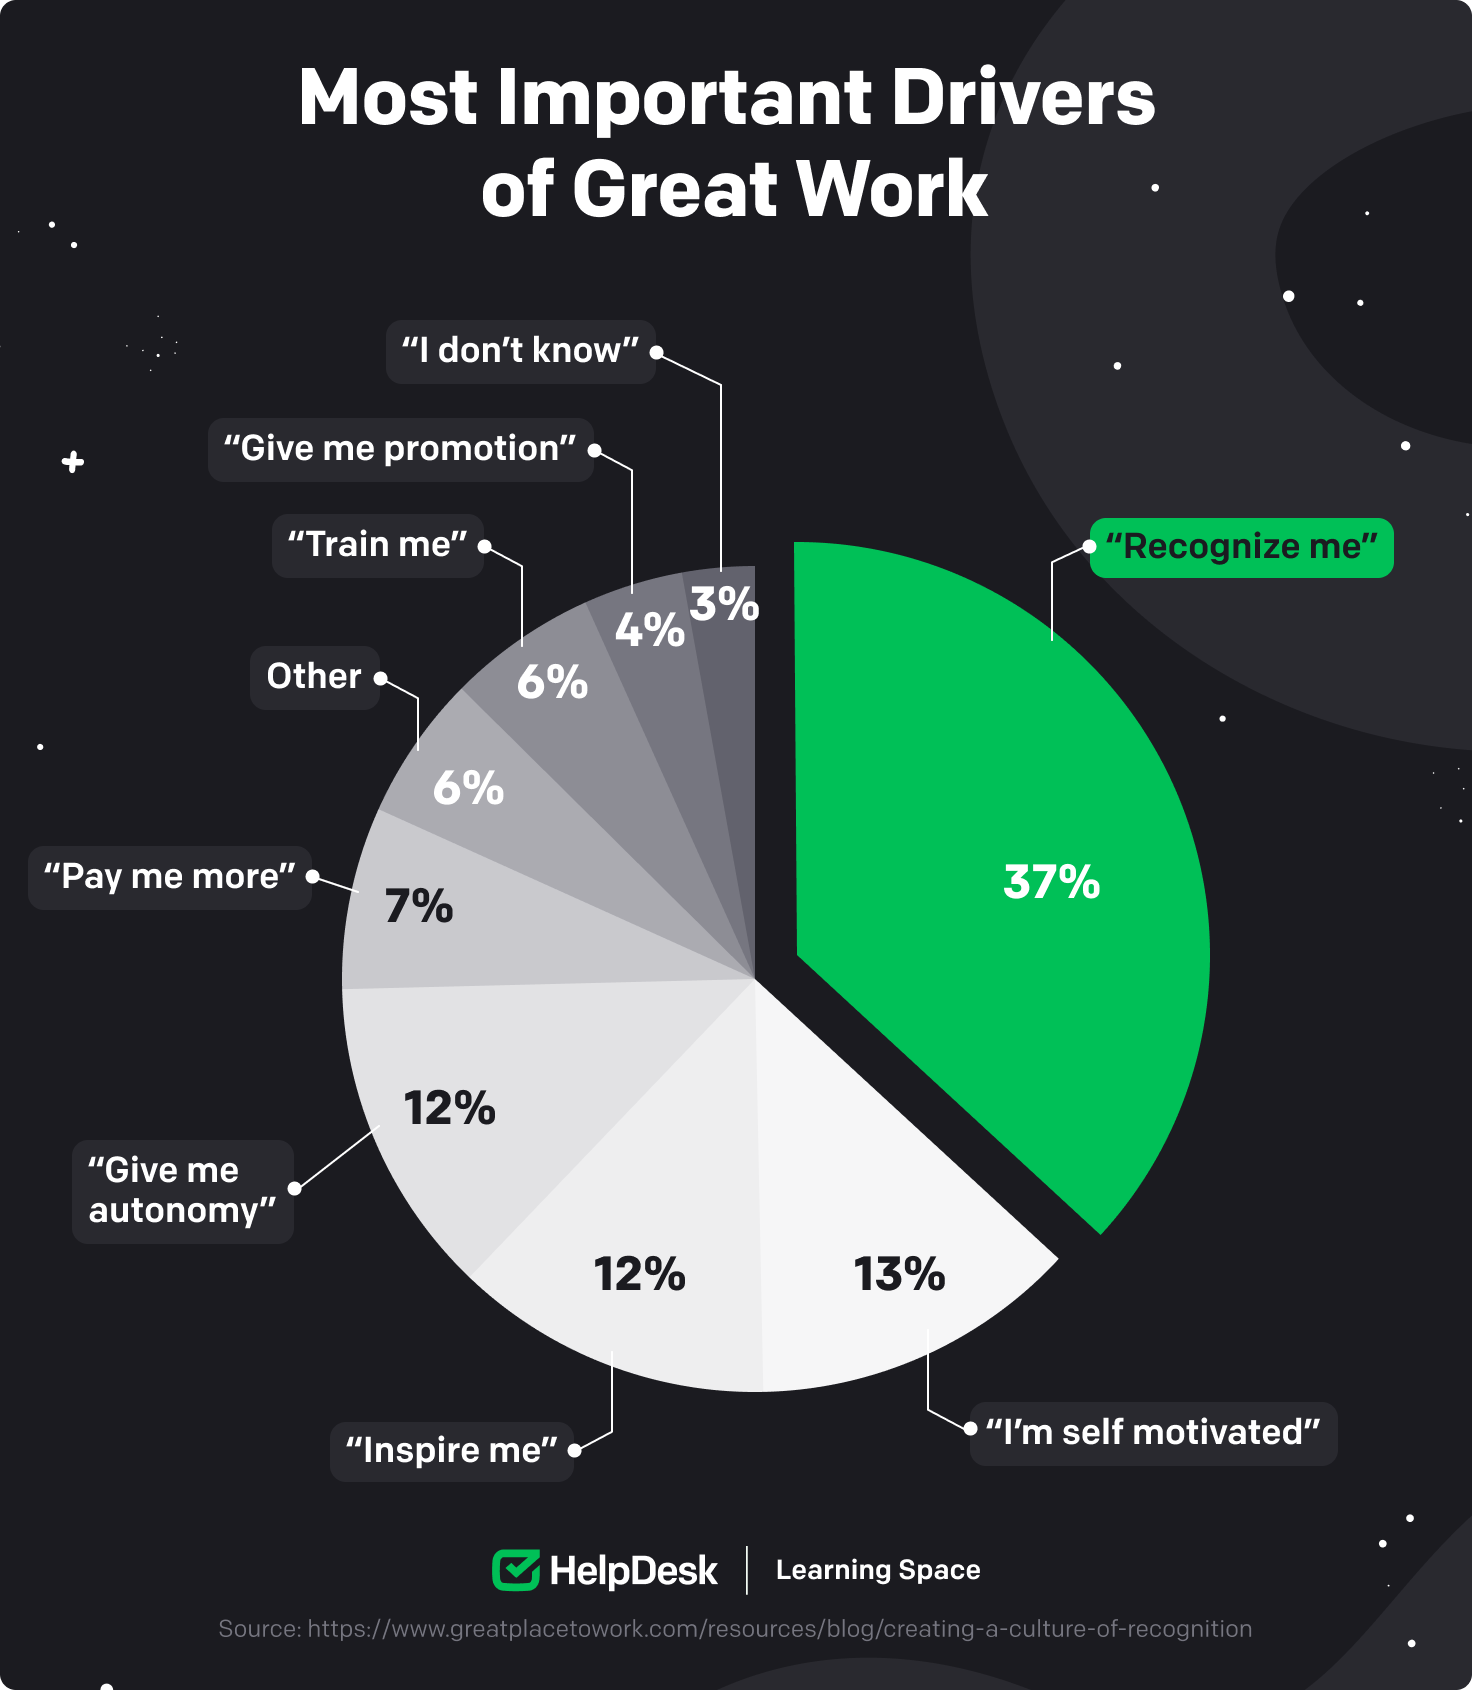 Pie chart with results for key drivers of great work.